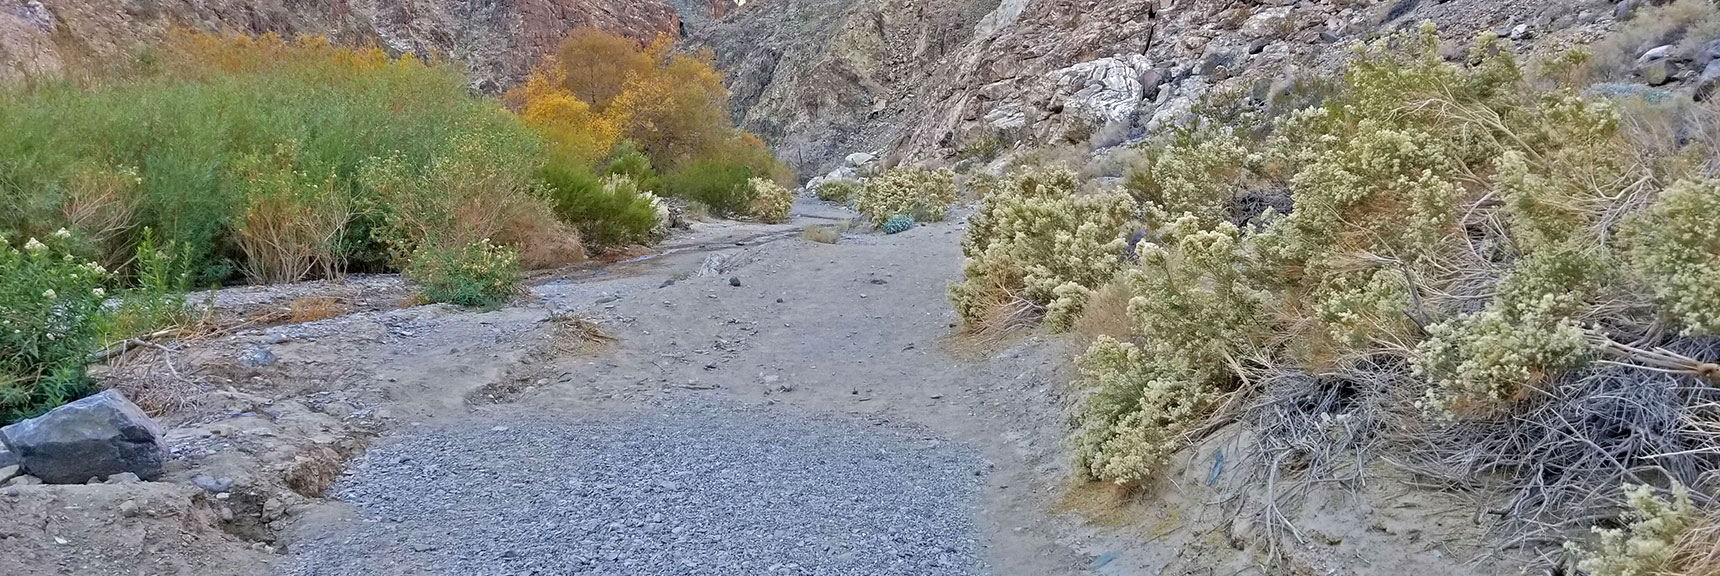 First Sign of Water: A Small Creek and Large Trees Ahead. | Darwin Falls, Death Valley National Park, California